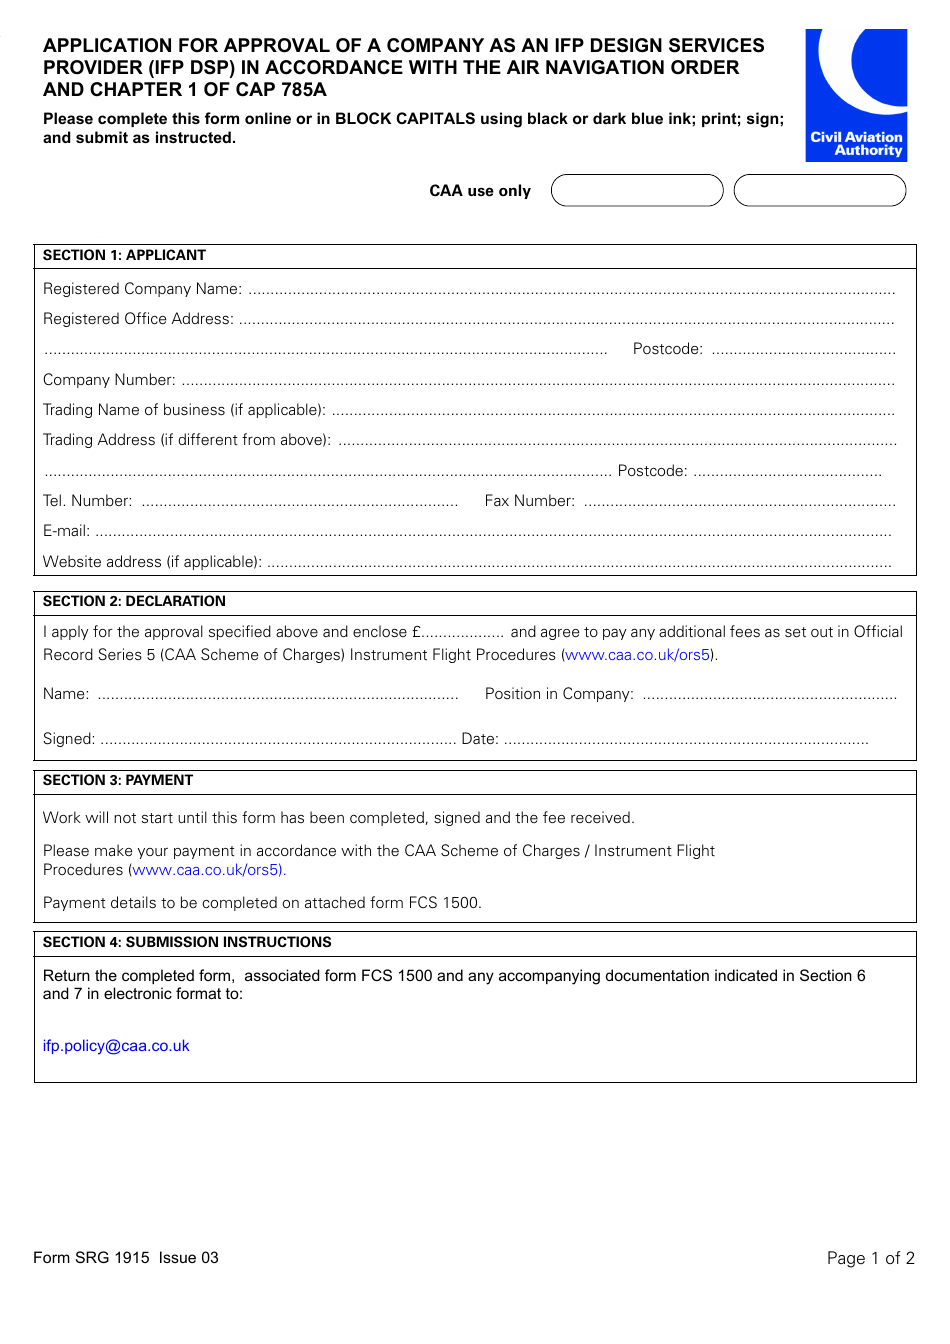 Form SRG1915 Application for Approval of a Company as an Ifp Design Services Provider (Ifp Dsp) in Accordance With the Air Navigation Order and Chapter 1 of CAP 785a - United Kingdom, Page 1